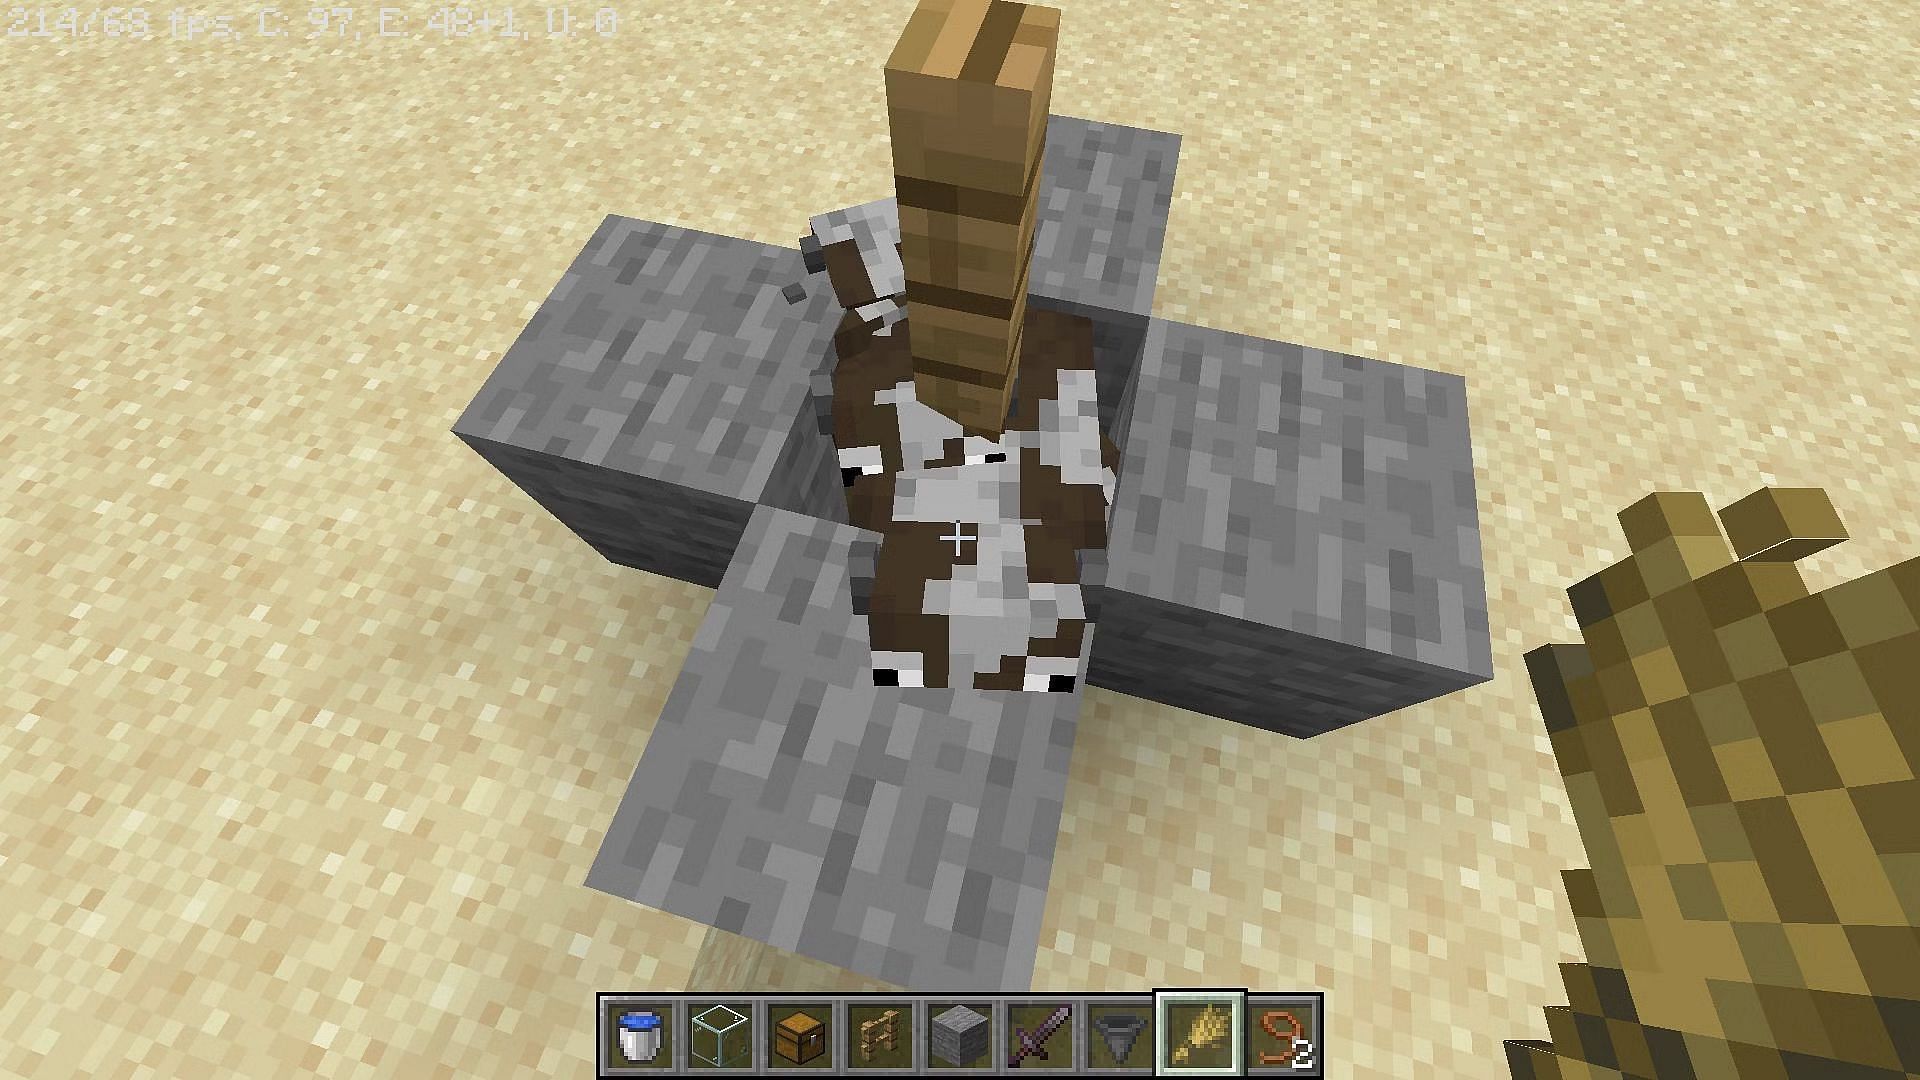 Players can create small but effective animal farms in Minecraft (Image via Mojang)